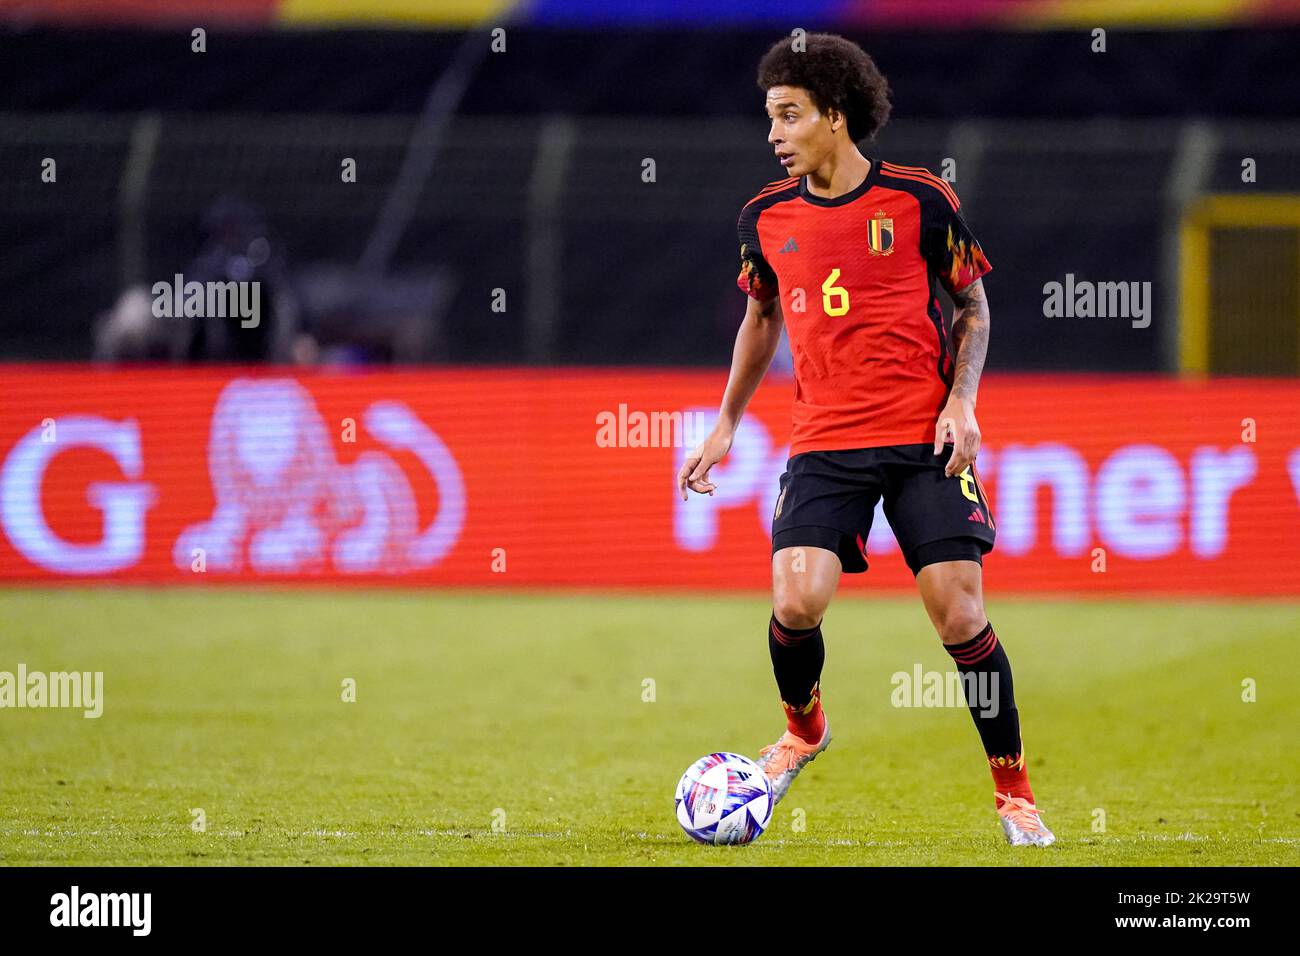 BRUSSELS, BELGIUM - SEPTEMBER 22: Axel Witsel of Belgium during the UEFA Nations League A Group 4 match between the Belgium and Wales at the Stade Roi Baudouin on September 22, 2022 in Brussels, Belgium (Photo by Joris Verwijst/Orange Pictures) Stock Photo